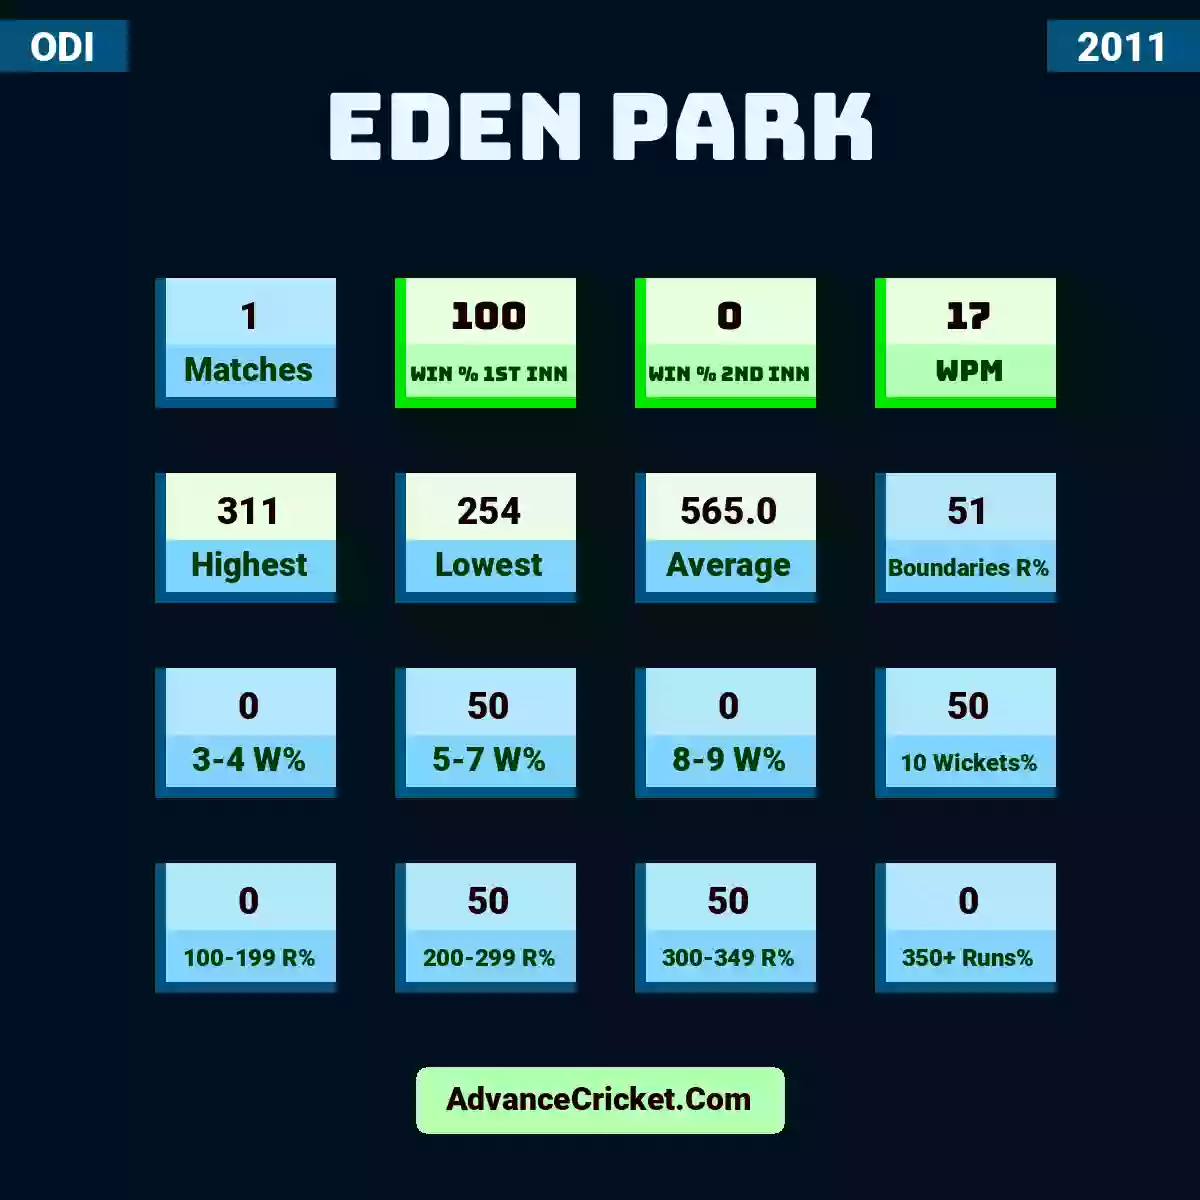 Image showing Eden Park with Matches: 1, Win % 1st Inn: 100, Win % 2nd Inn: 0, WPM: 17, Highest: 311, Lowest: 254, Average: 565.0, Boundaries R%: 51, 3-4 W%: 0, 5-7 W%: 50, 8-9 W%: 0, 10 Wickets%: 50, 100-199 R%: 0, 200-299 R%: 50, 300-349 R%: 50, 350+ Runs%: 0.